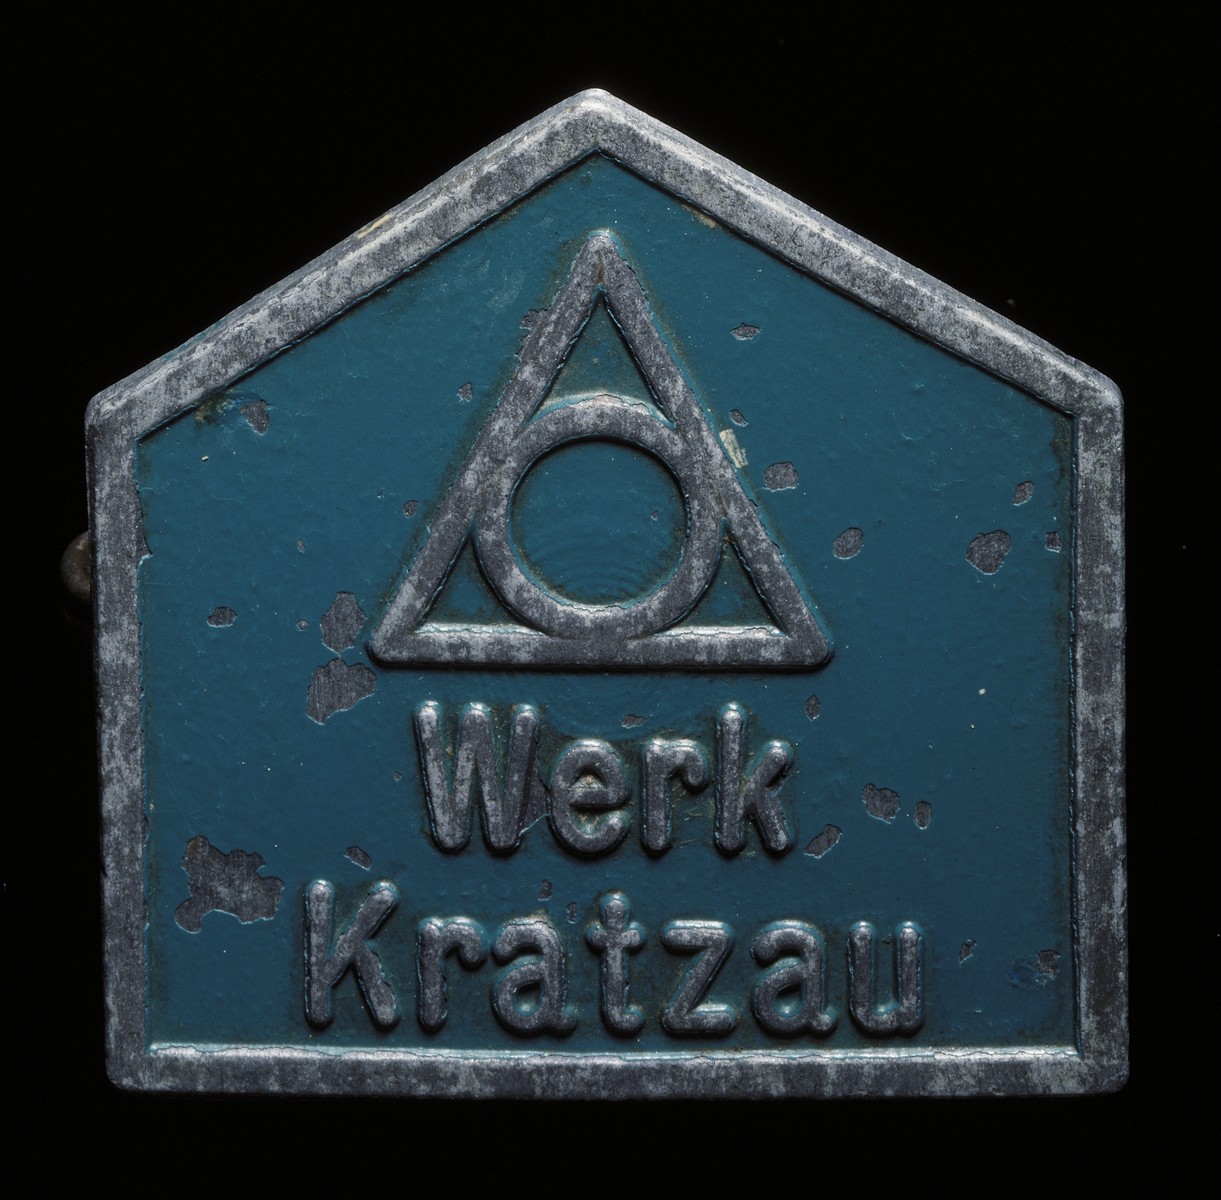 Five-sided badge issued to Helen Waterford identifying her as a prisoner from the Kratzau-Chrastava labor camp, a satellite camp of Gross Rosen.

Waterford was interned at the camp from October 1944 to May 1945.